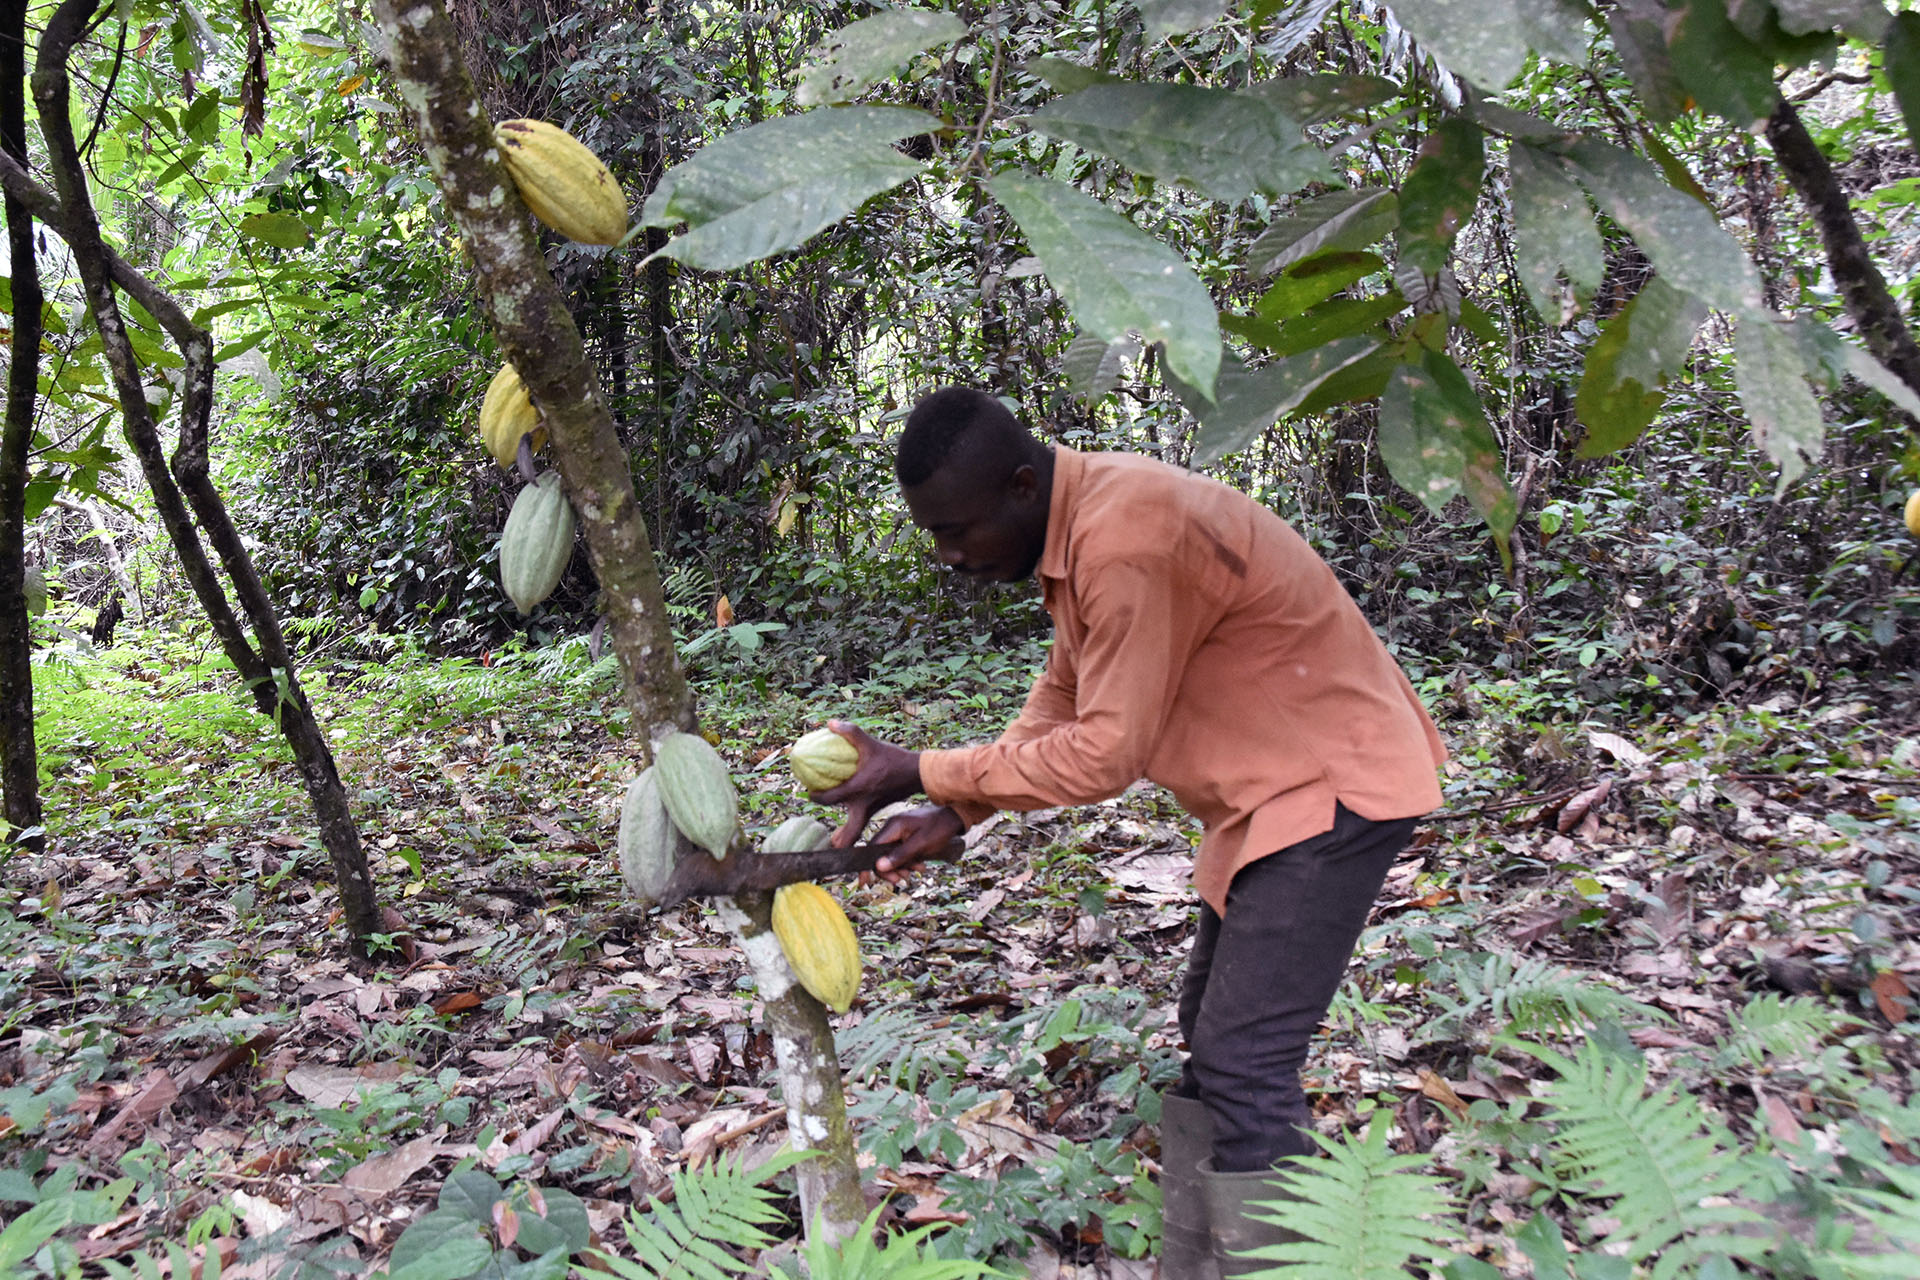 A path to sustainable cocoa and forest restoration in Côte d'Ivoire